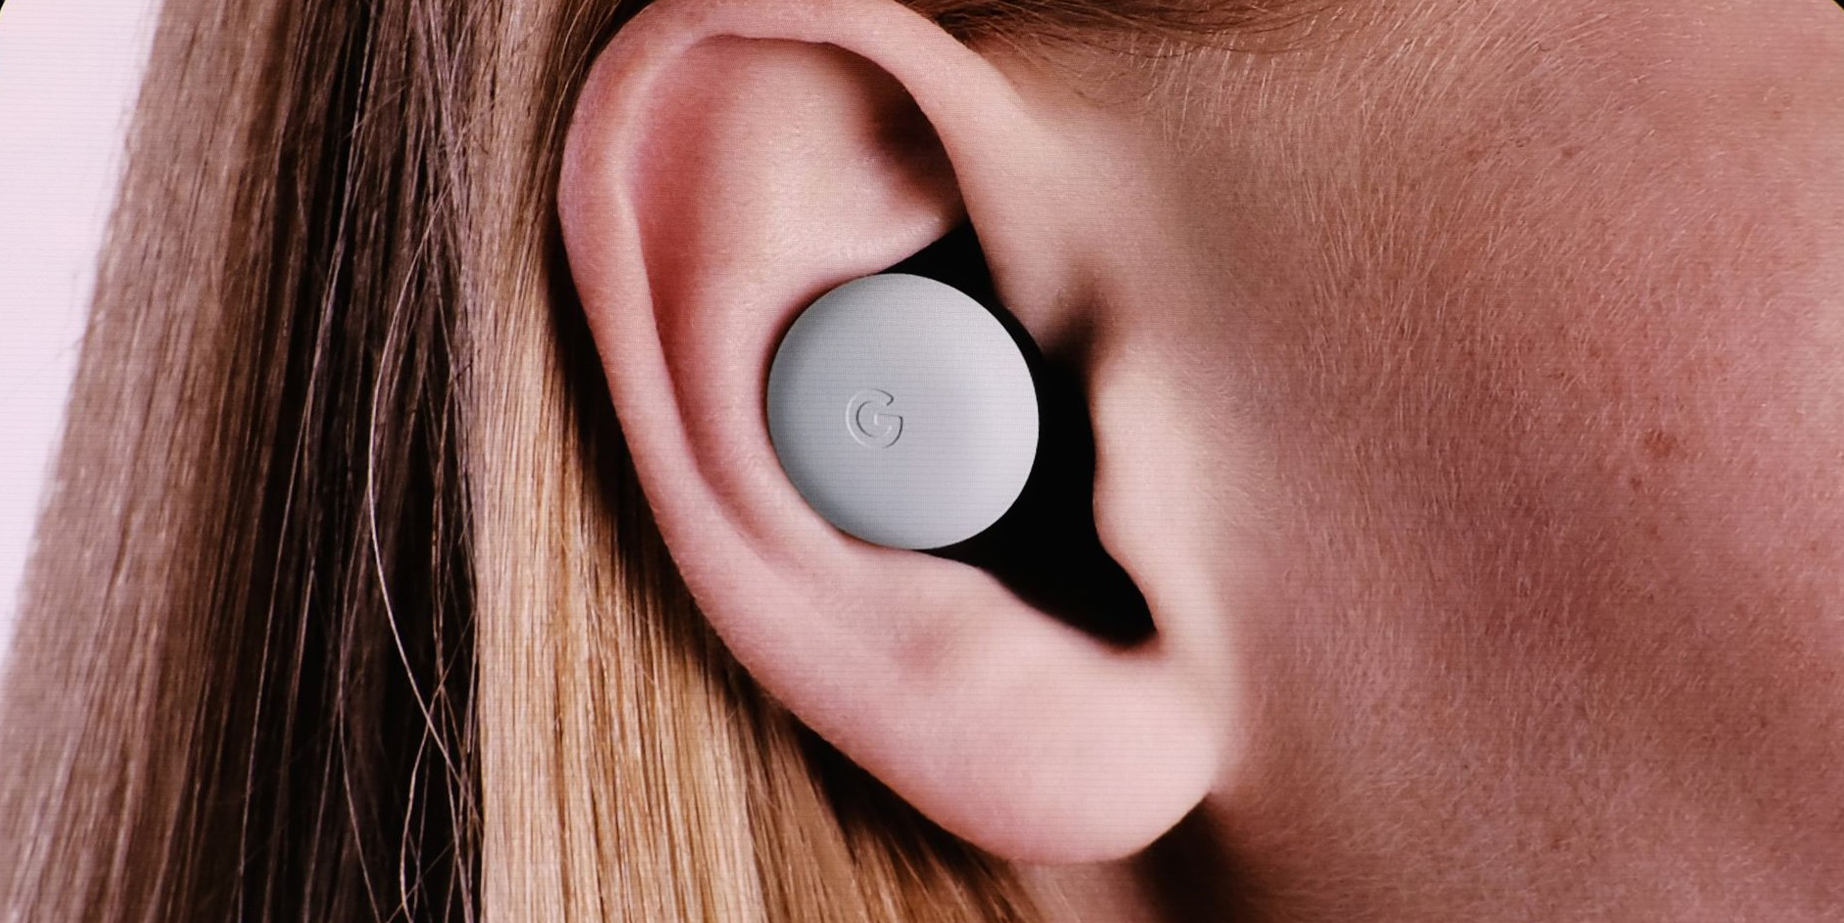 Google has learnt how to measure a person's heart rate using TWS headphones